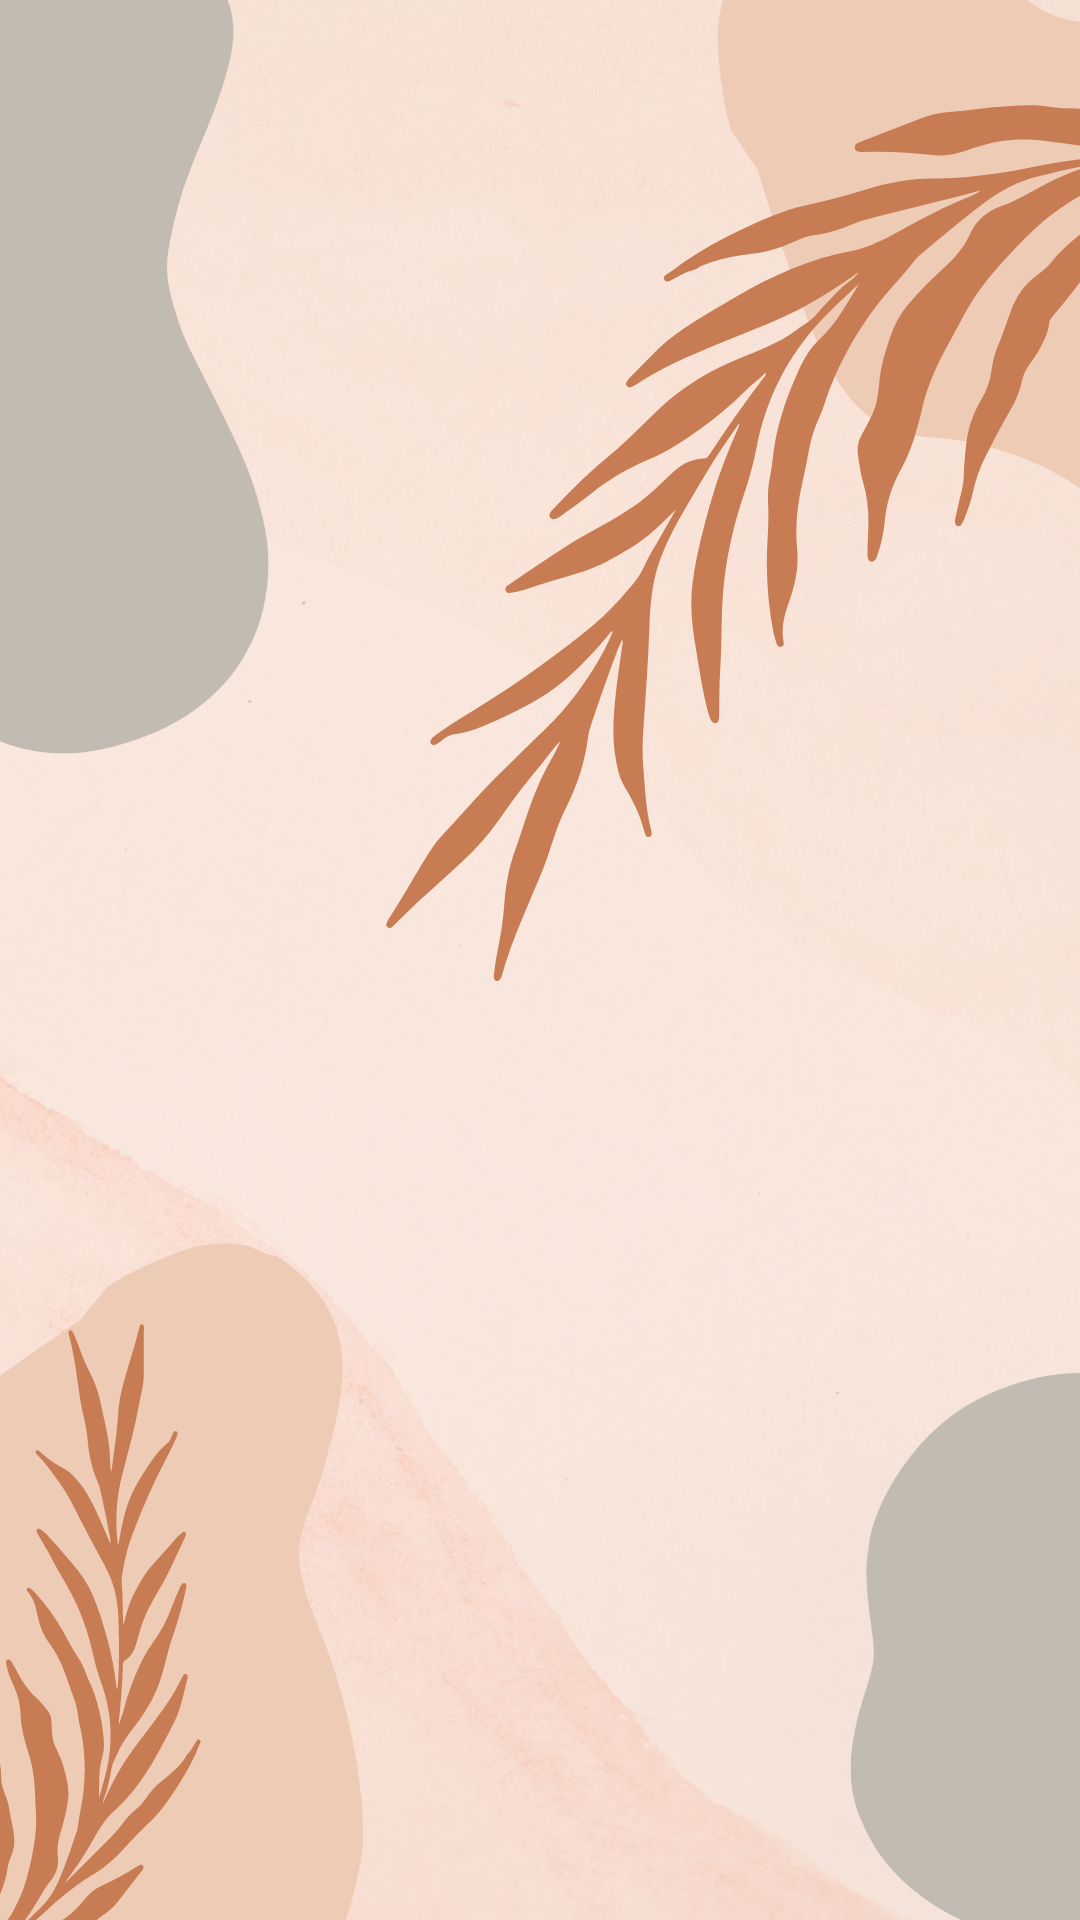 Cute Aesthetic iphone Background (FREE)